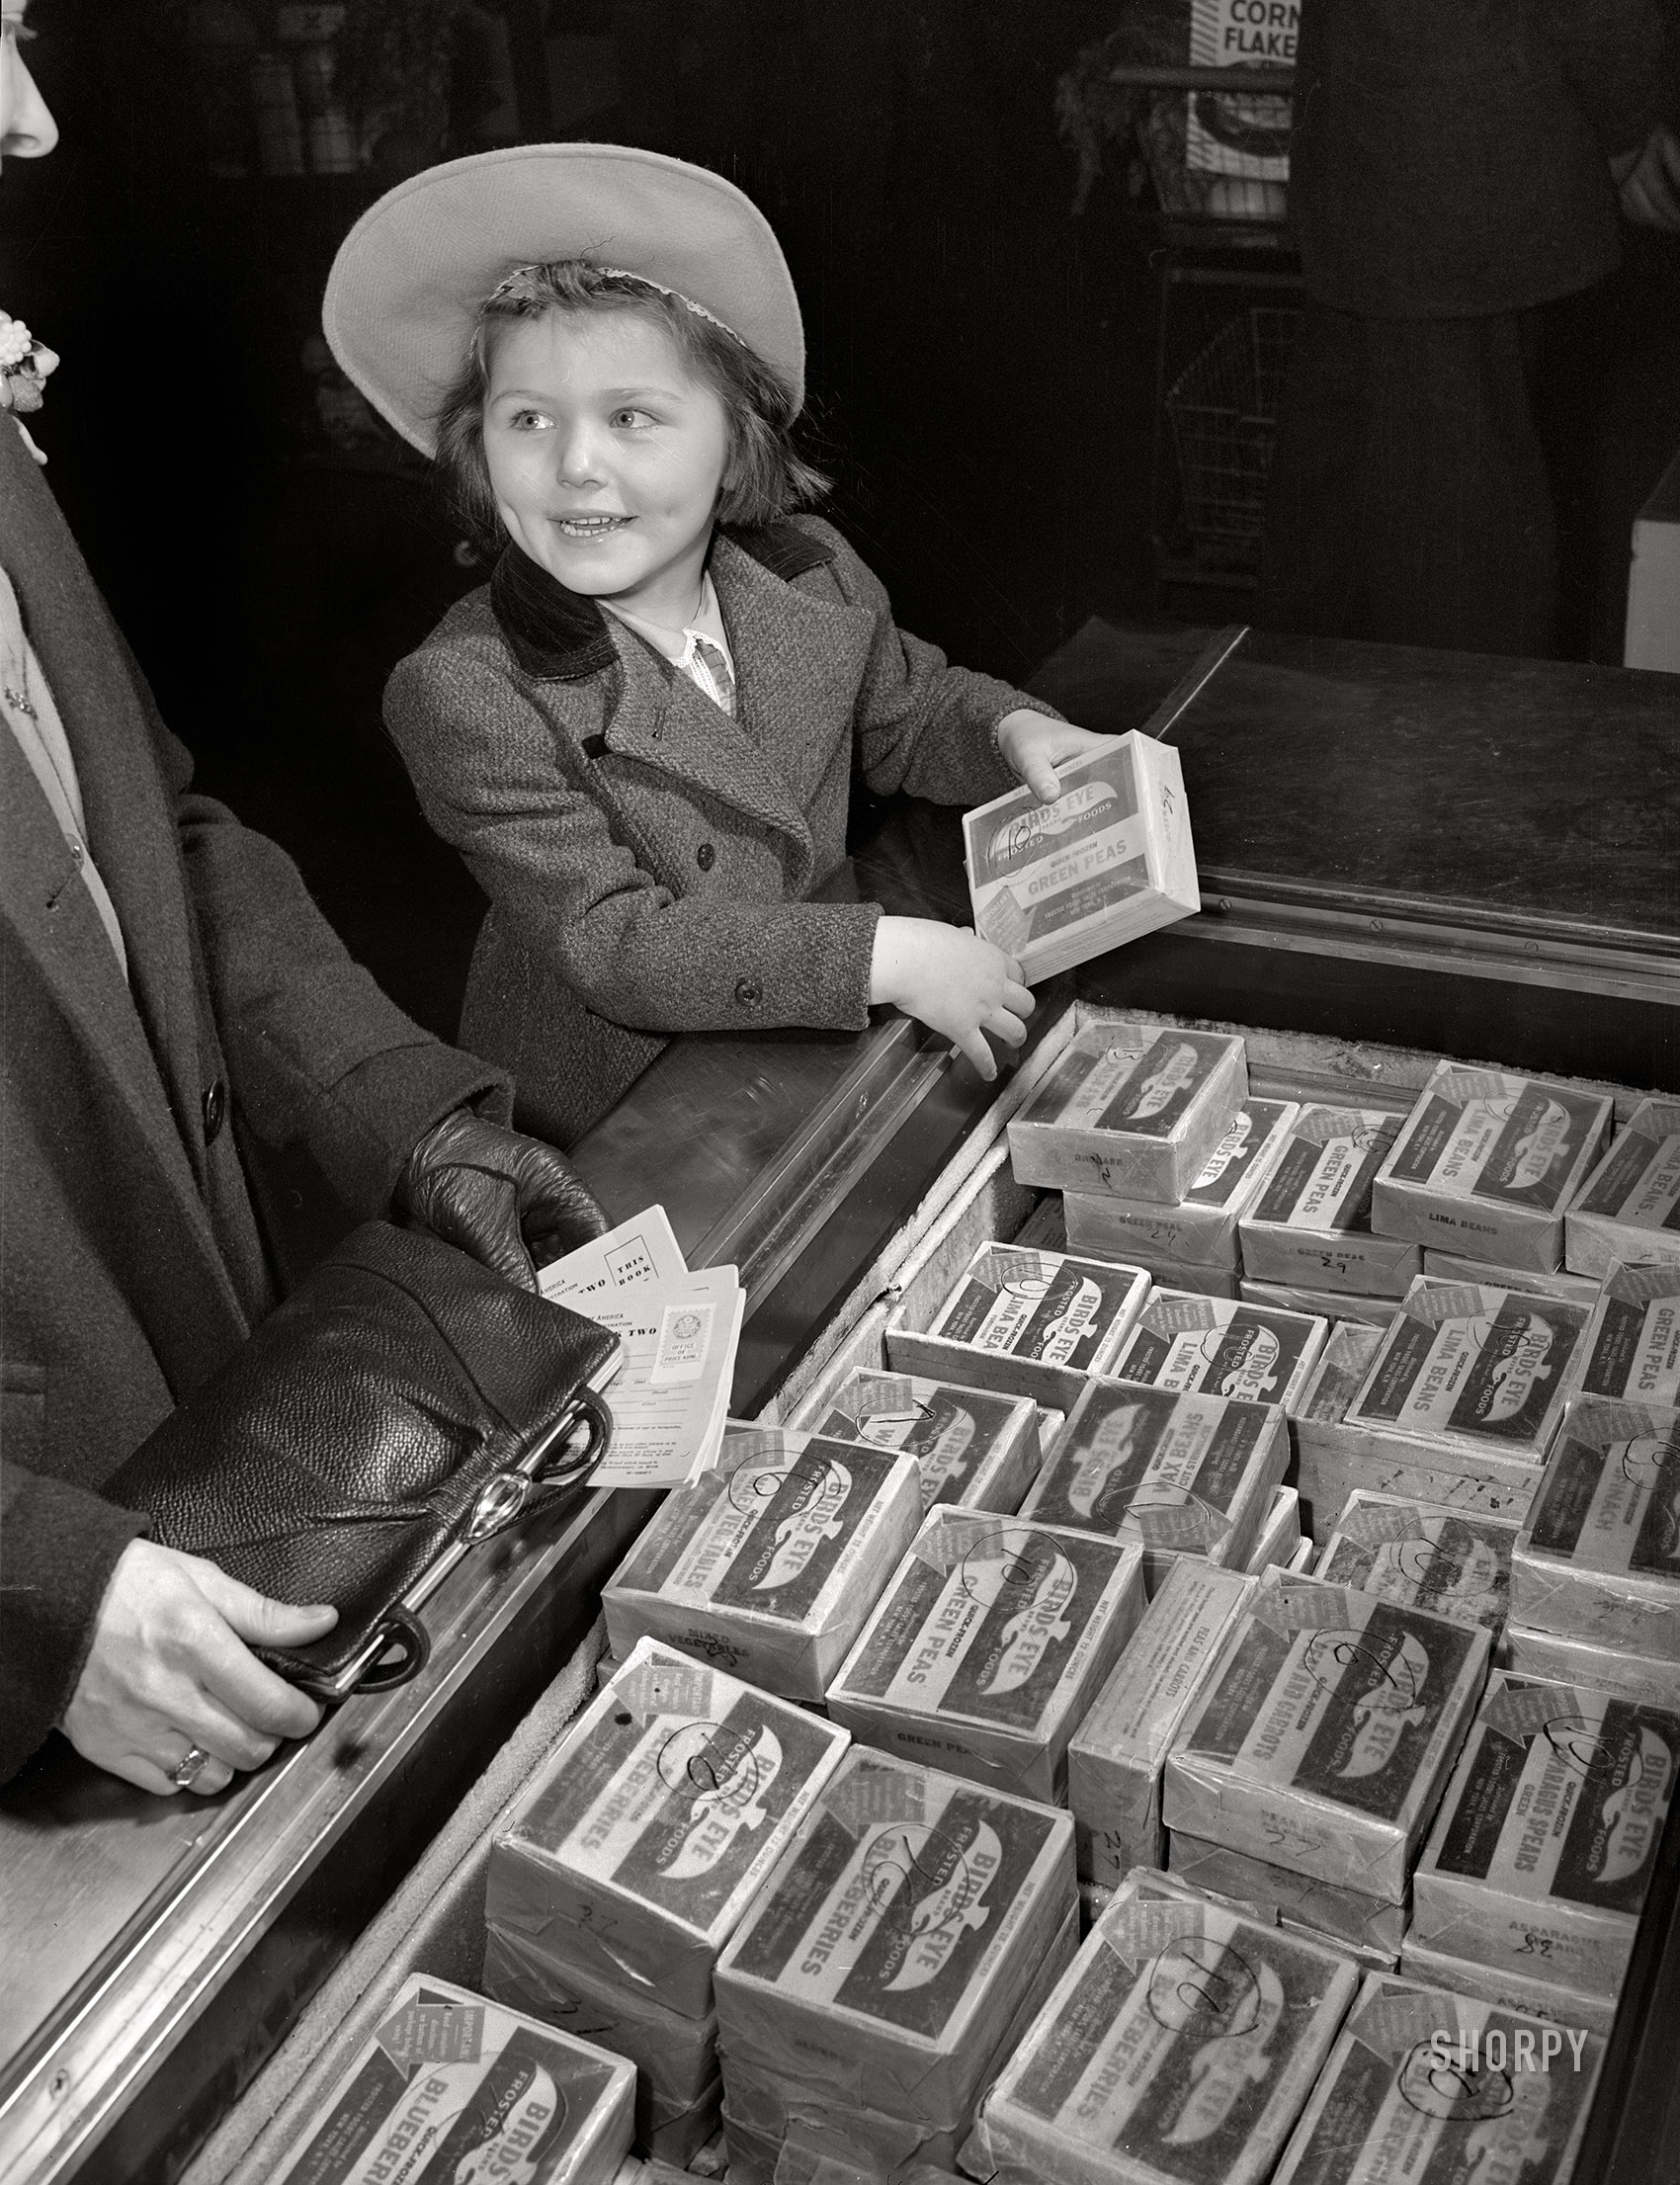 February 1943. Washington, D.C. "Preparation for point rationing. While Mother keeps handy her War Ration Book Two, daughter examines the frozen foods which require removal of point stamps." 4x5 acetate negative by Alfred Palmer, Office of War Information. View full size.
